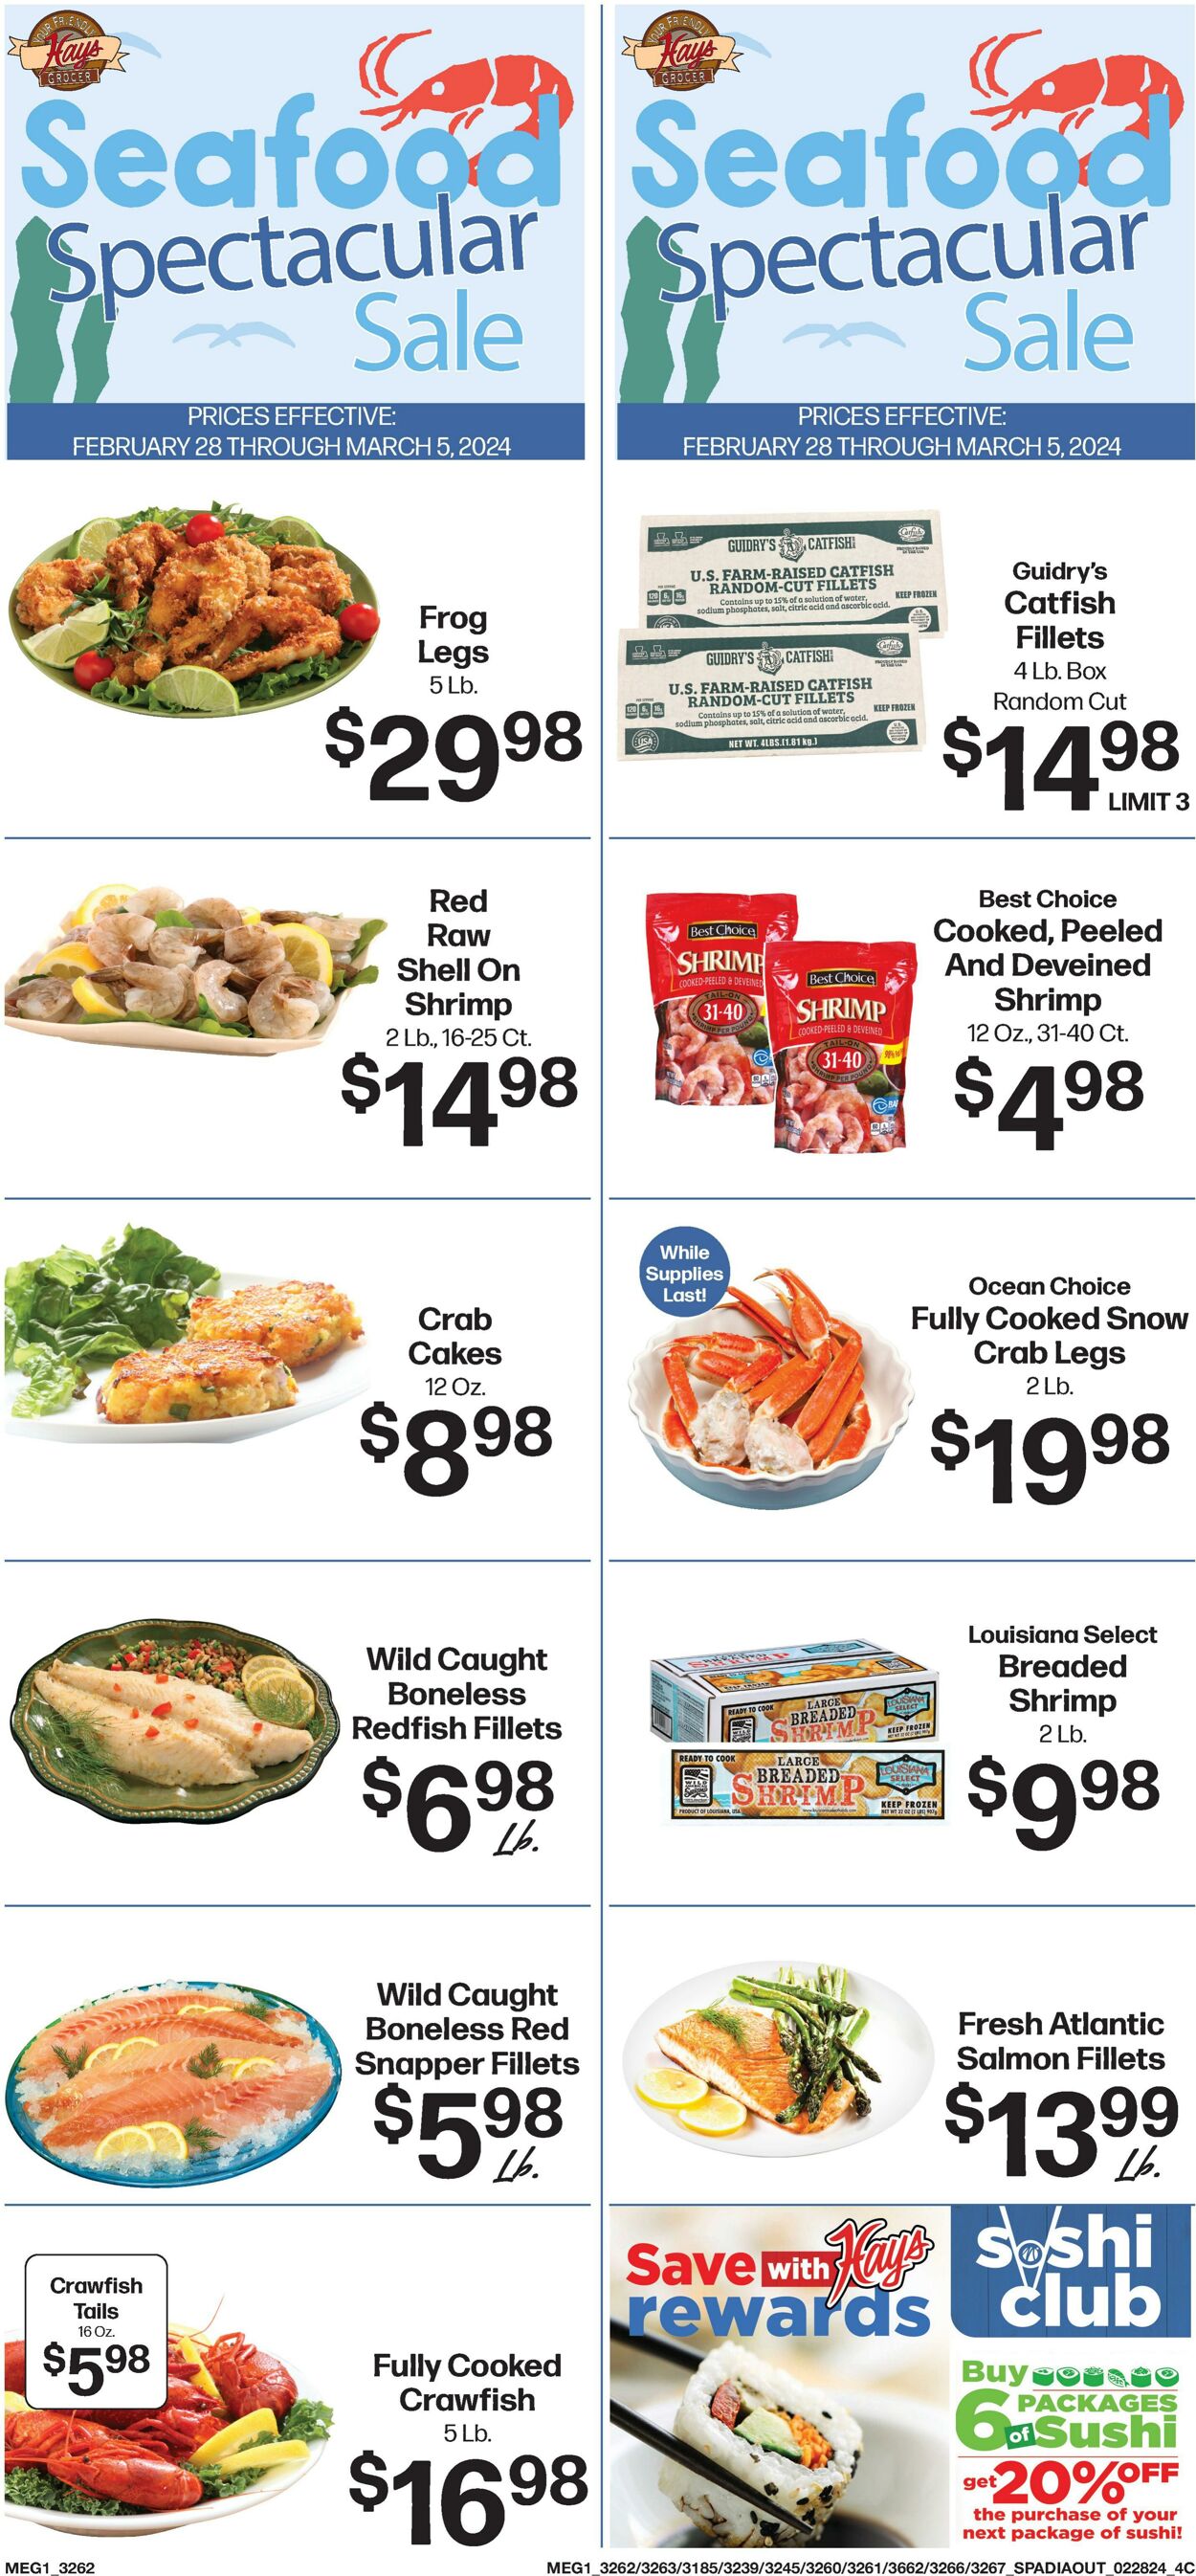 Hays Supermarkets Promotional weekly ads